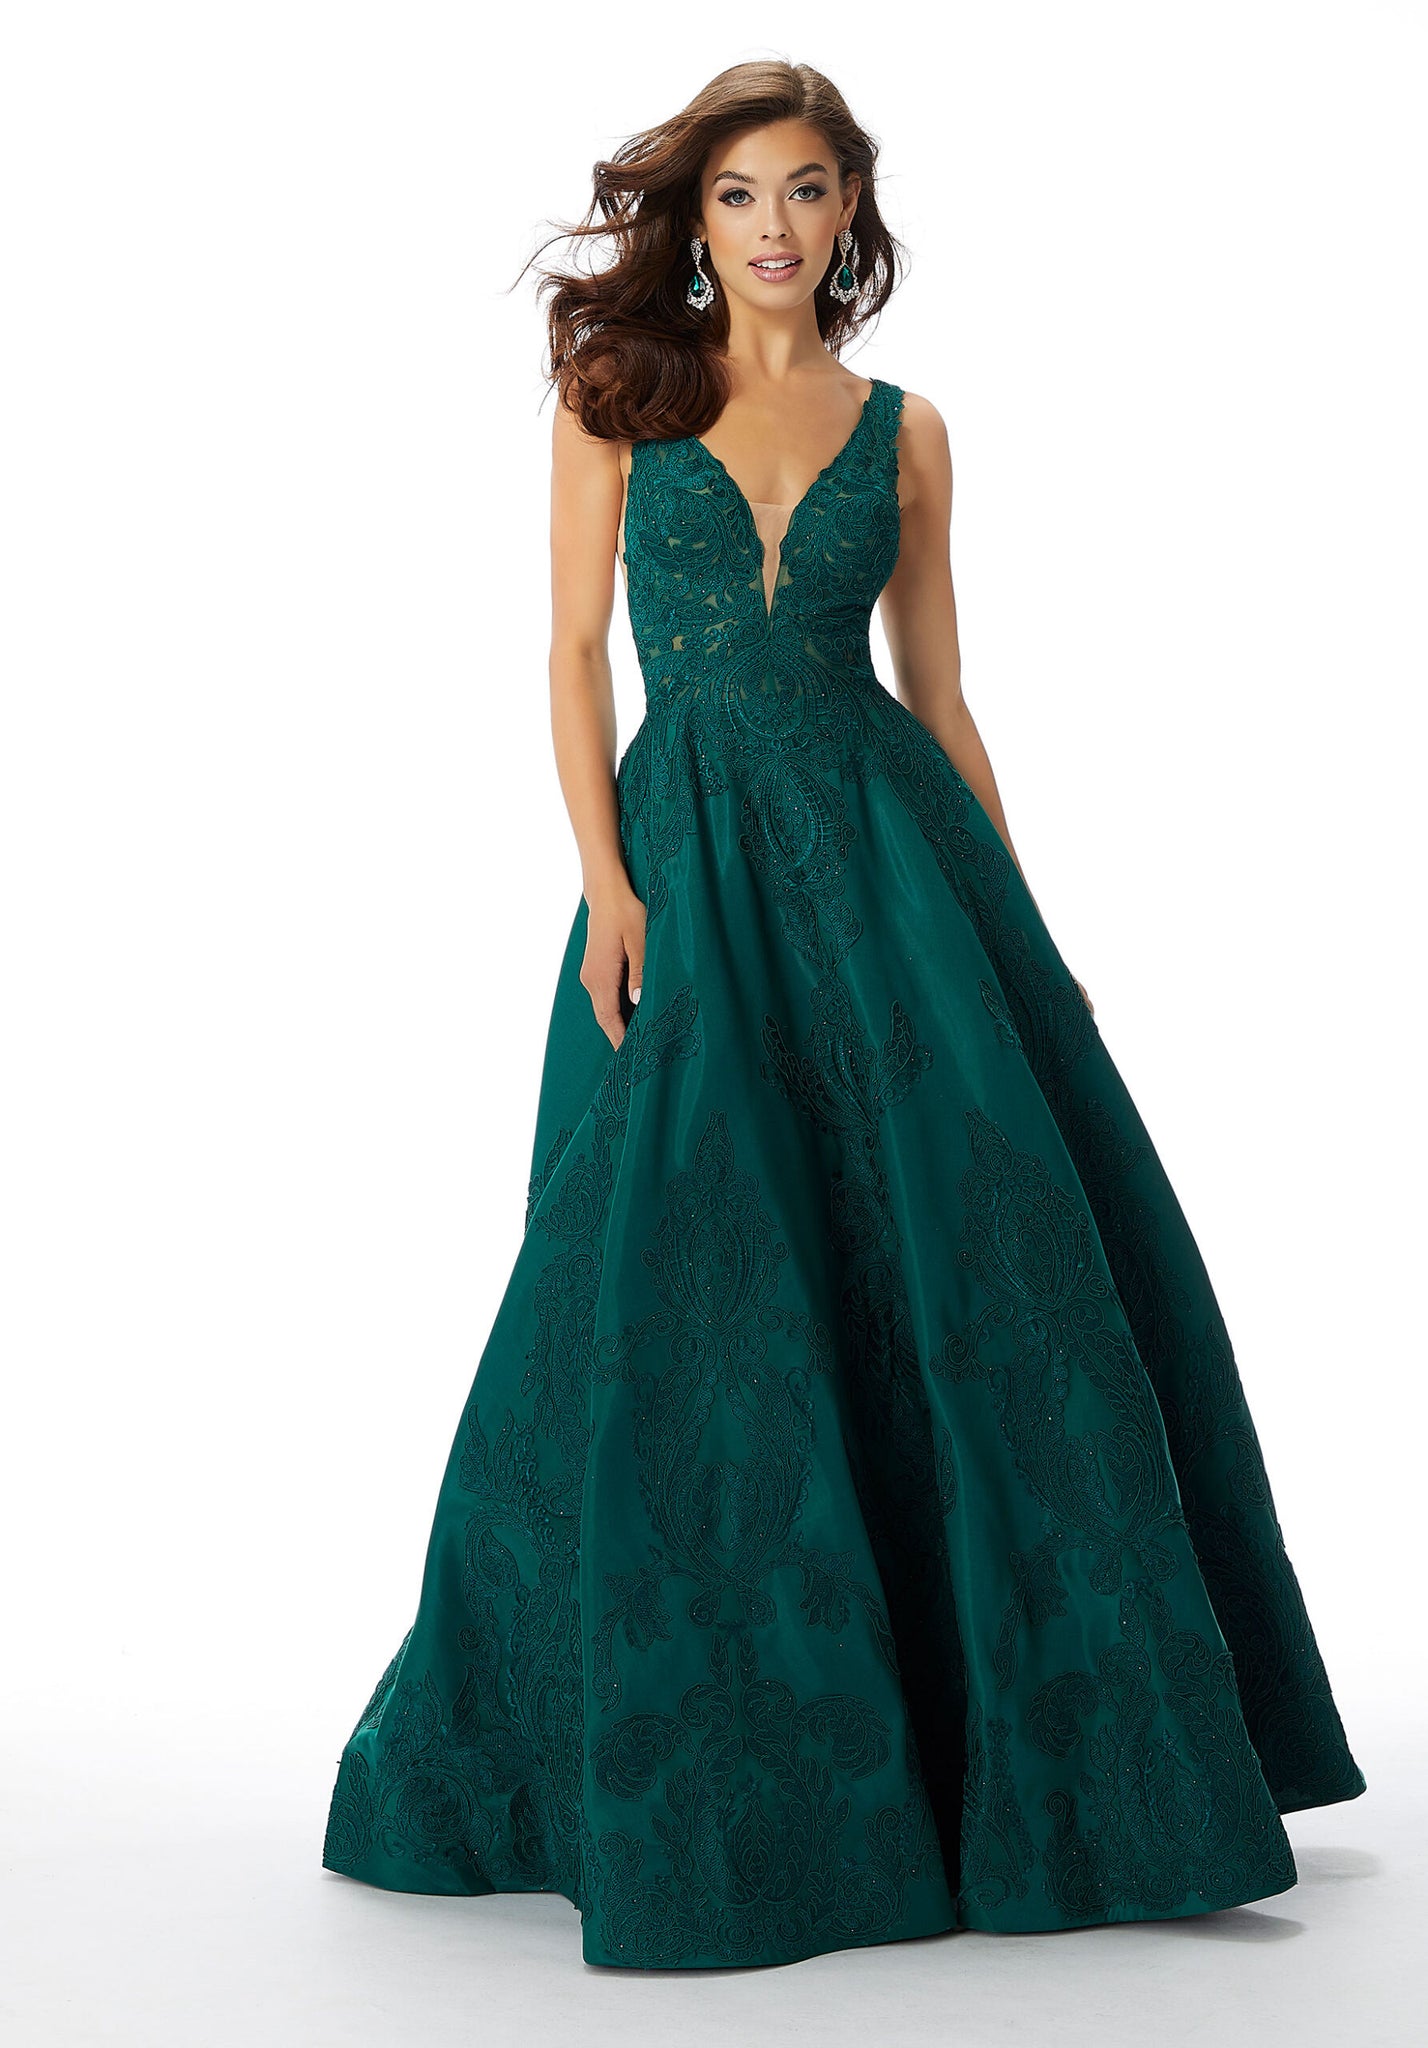 Elegant A-line gown with v-neckline, allover beaded lace appliqués and hidden pockets on Larissa satin.   Sizes: 0-28  Available in Emerald, Navy, Red, Royal, Champagne  If we do not have your desired size or color in stock please call or email us for availability